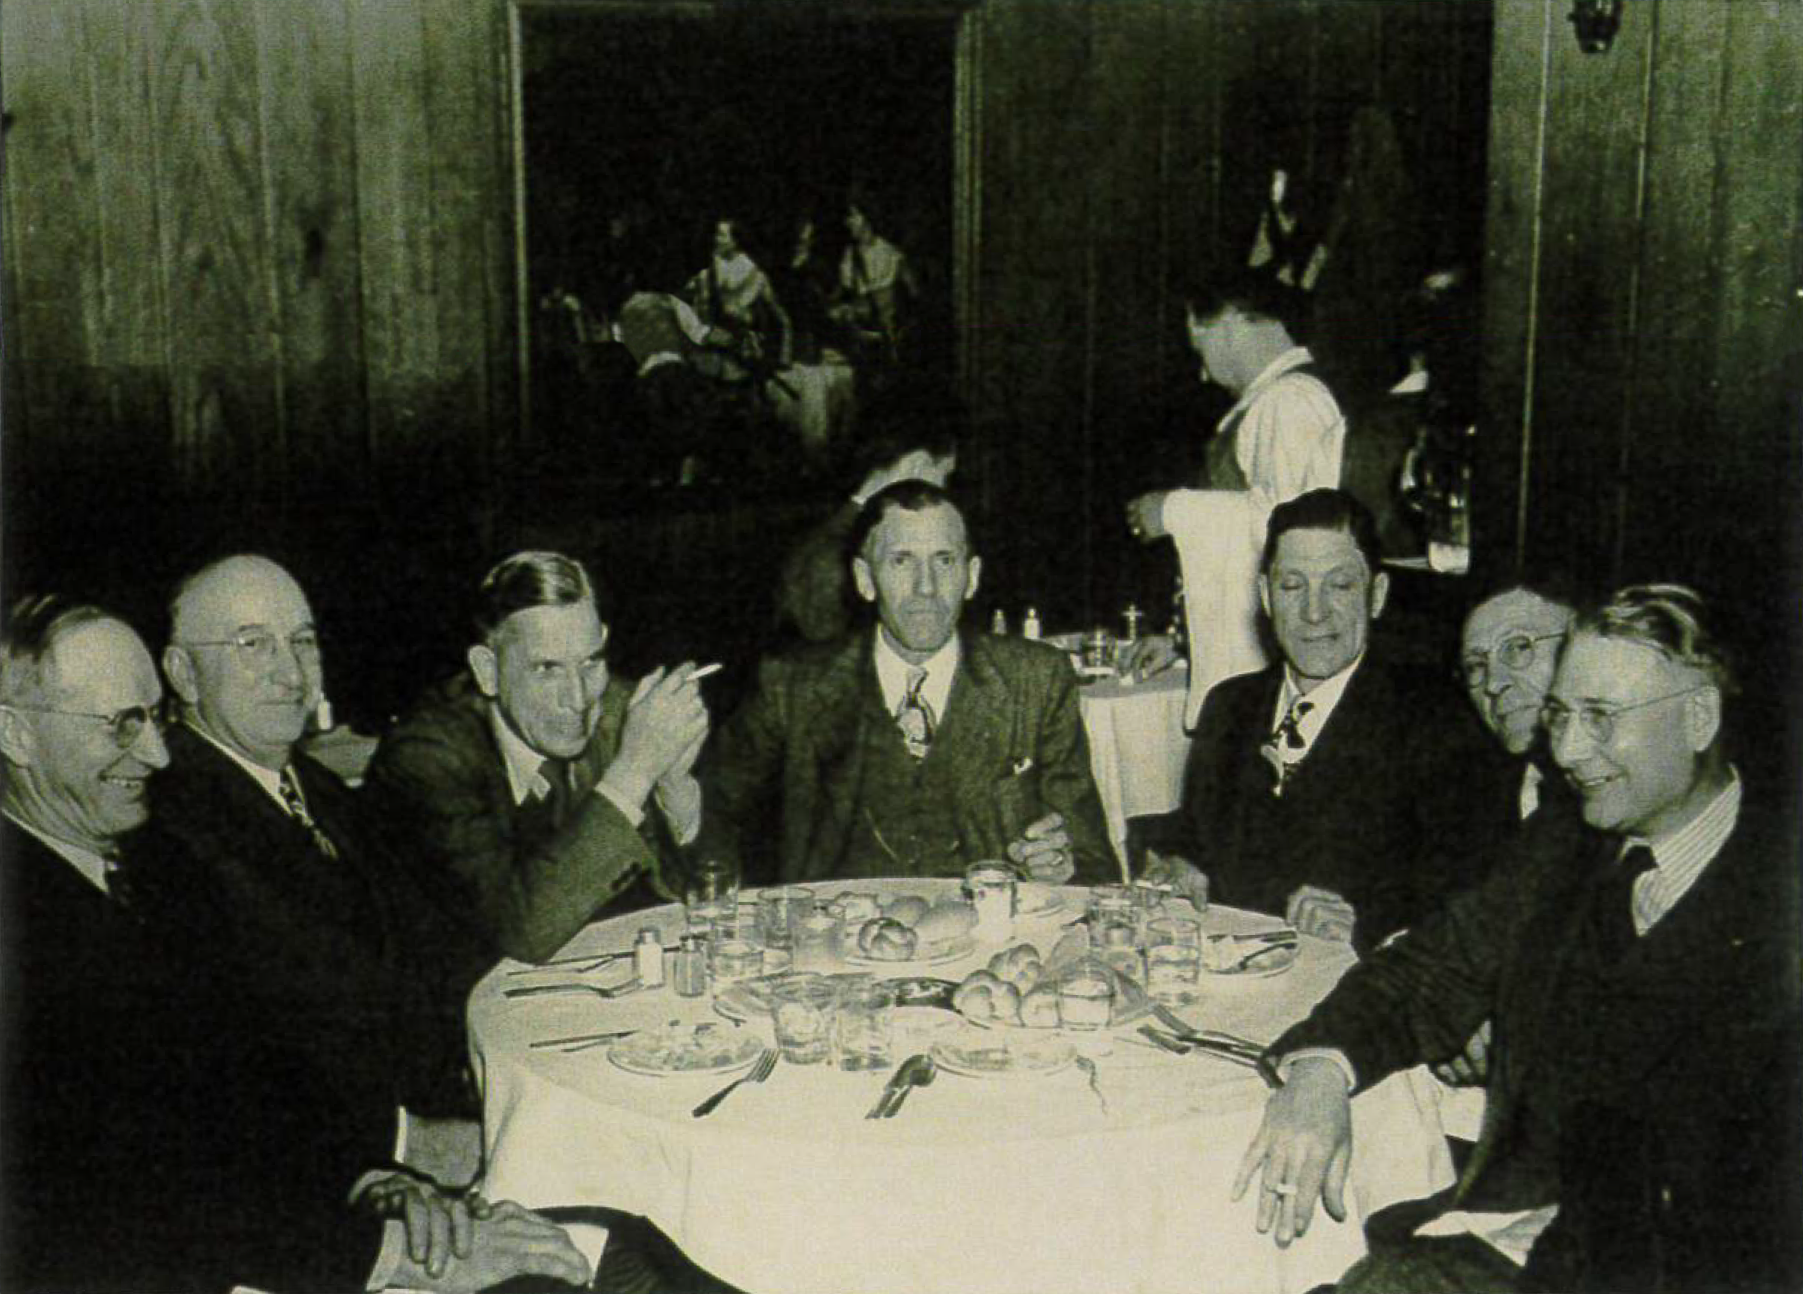 Pictured at the Builders Show in Chicago, Illinois on February 22, 1950, from left to right: Earl Mickelsen, William Rowe, Stanley Nielsen, Gotthard Sarman, Walter VanGerpen, Charles Engel, and Alfred Christensen